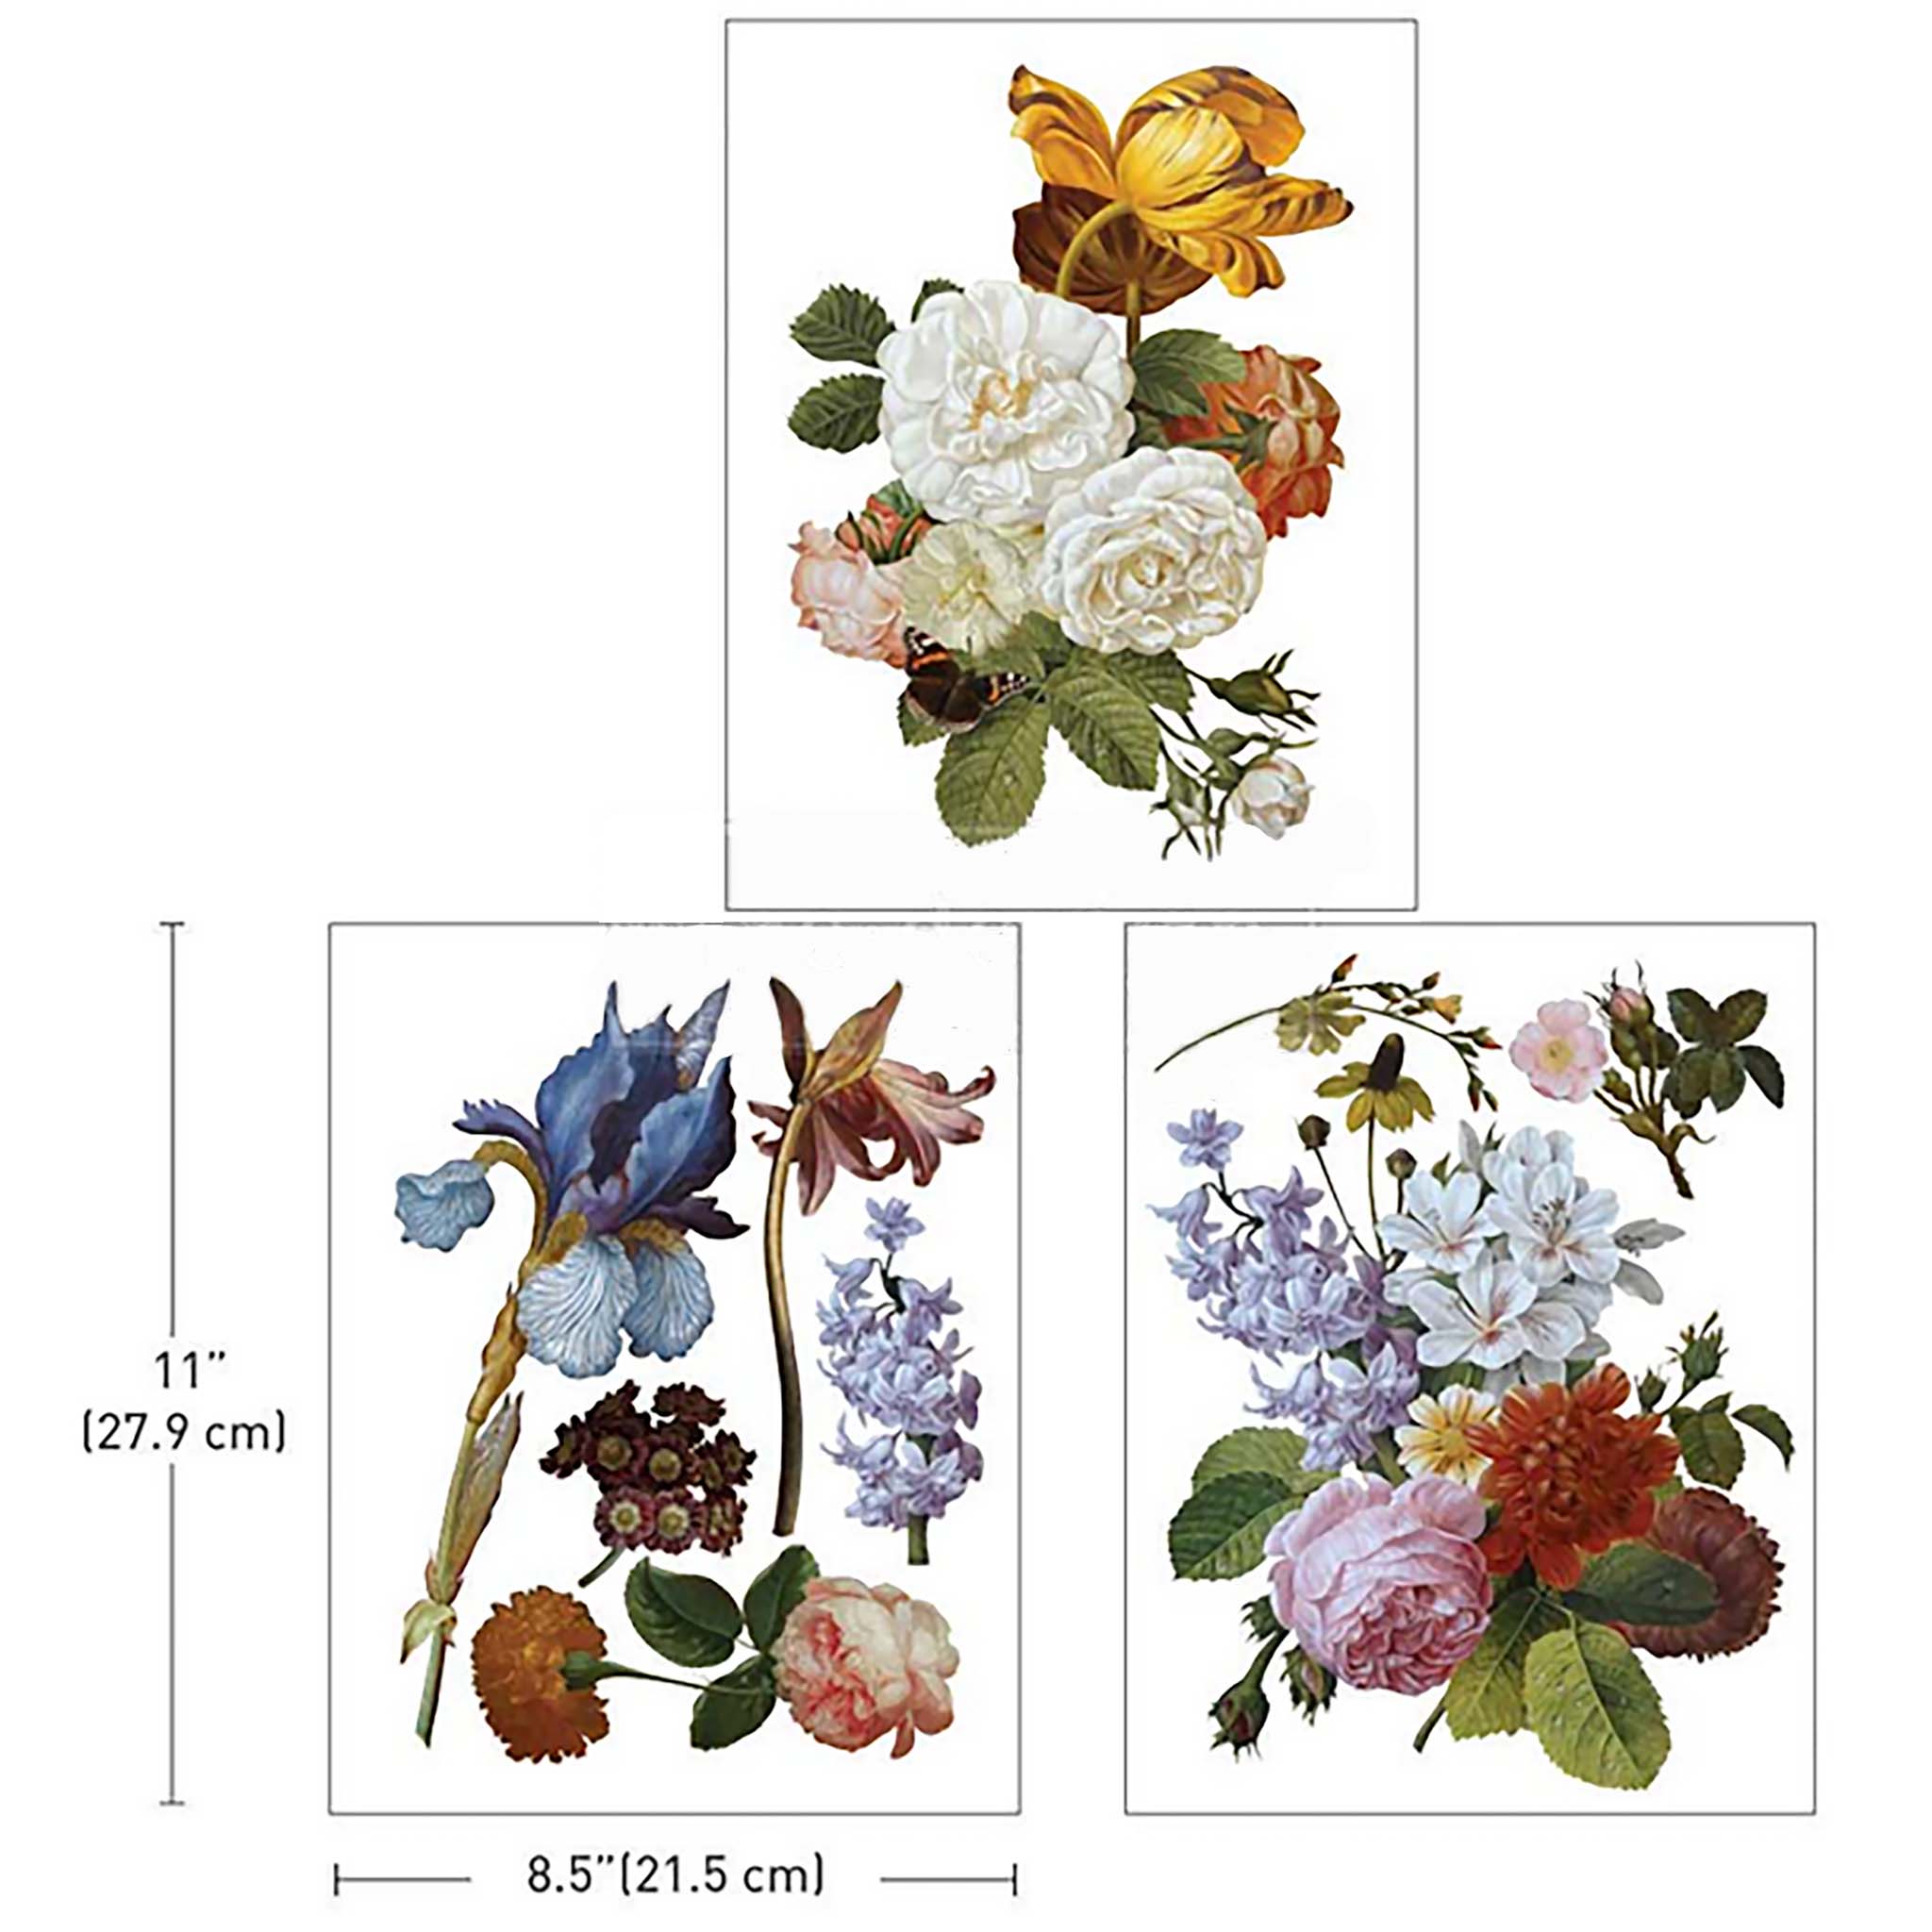 3 sheets of rub-on transfers featuring many deep colored wildflowers. Measurements for 1 sheet reads: 11" [27.9 cm] by 8.5" [21.5 cm].